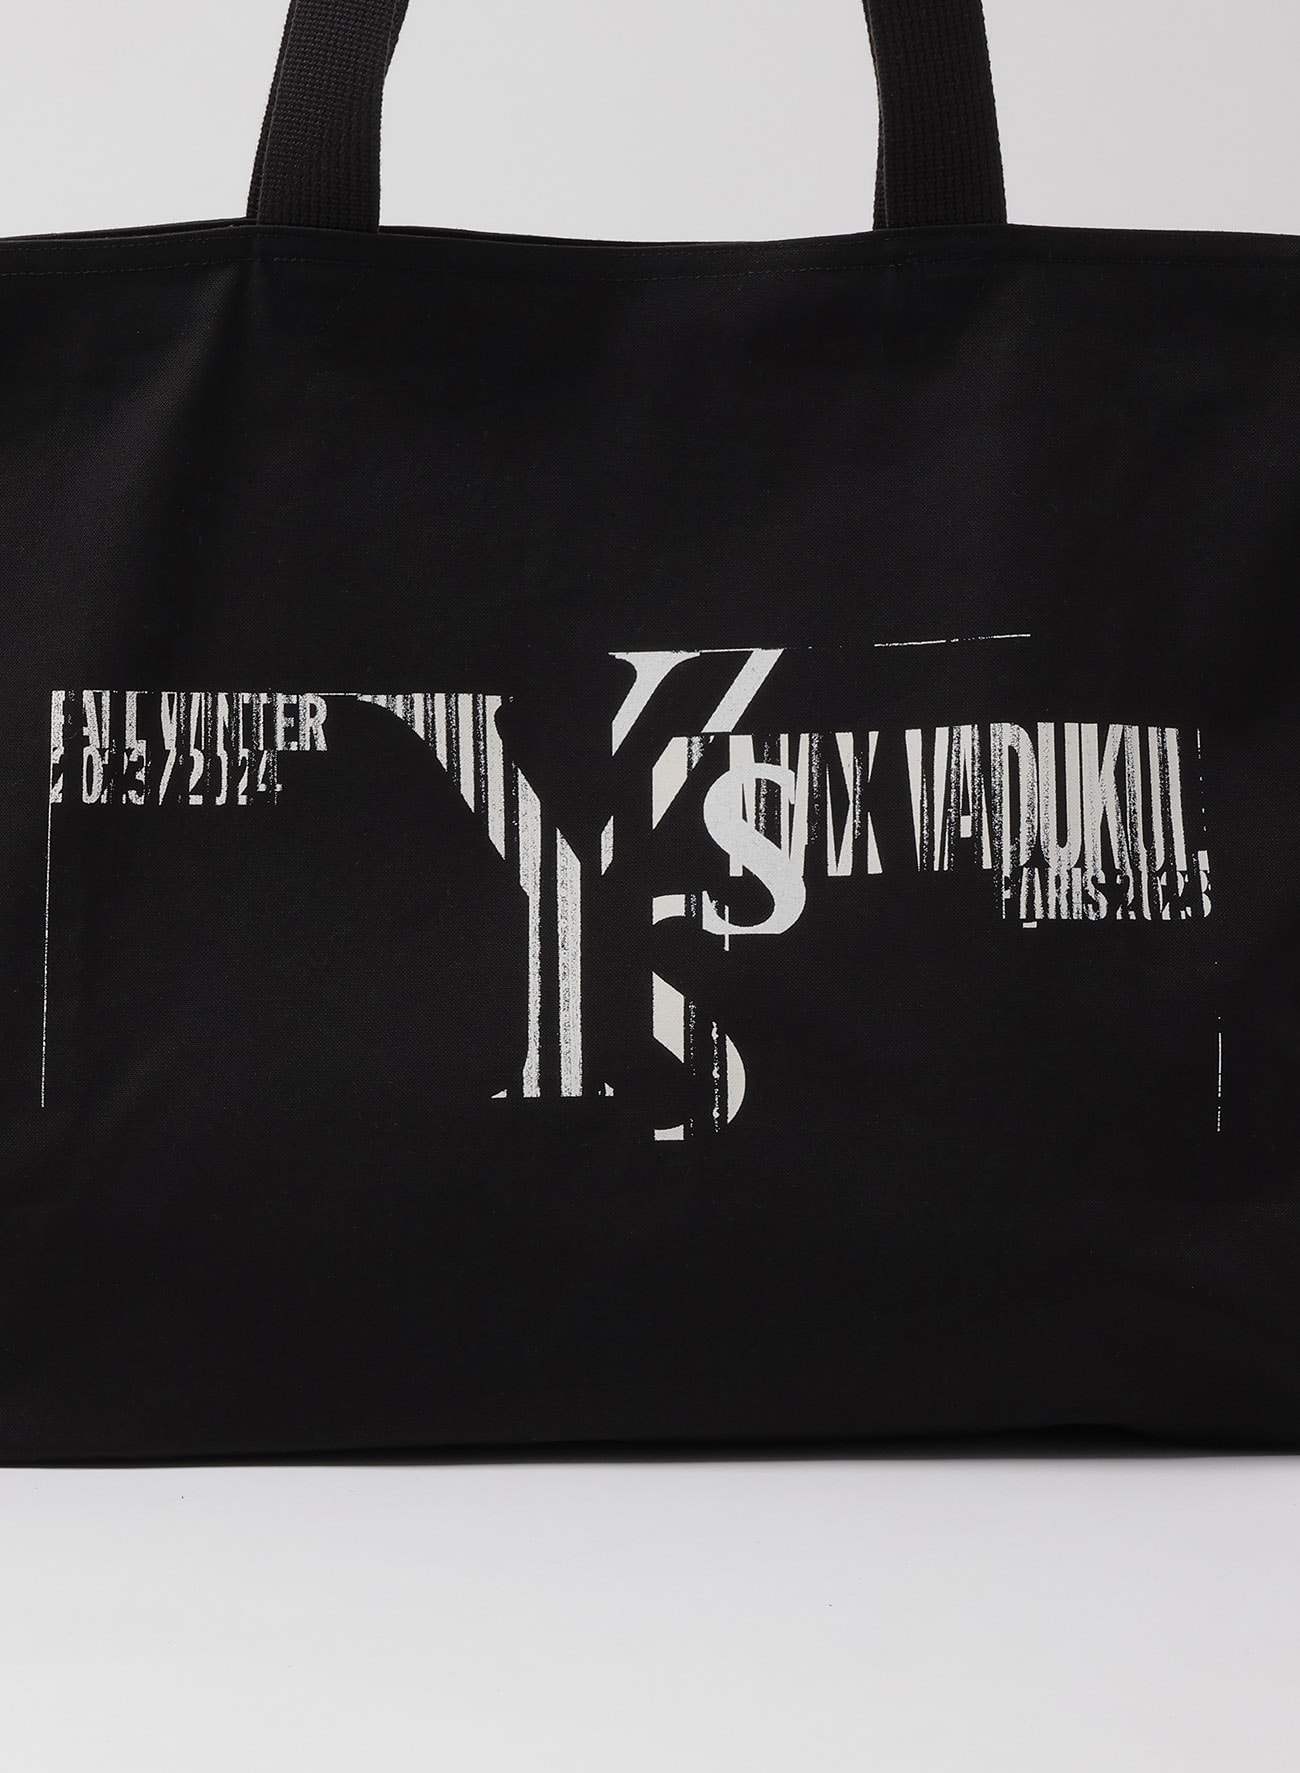 Y's x MAX VADUKUL] COTTON LEASE BAG(FREE SIZE Black): Y's｜THE 